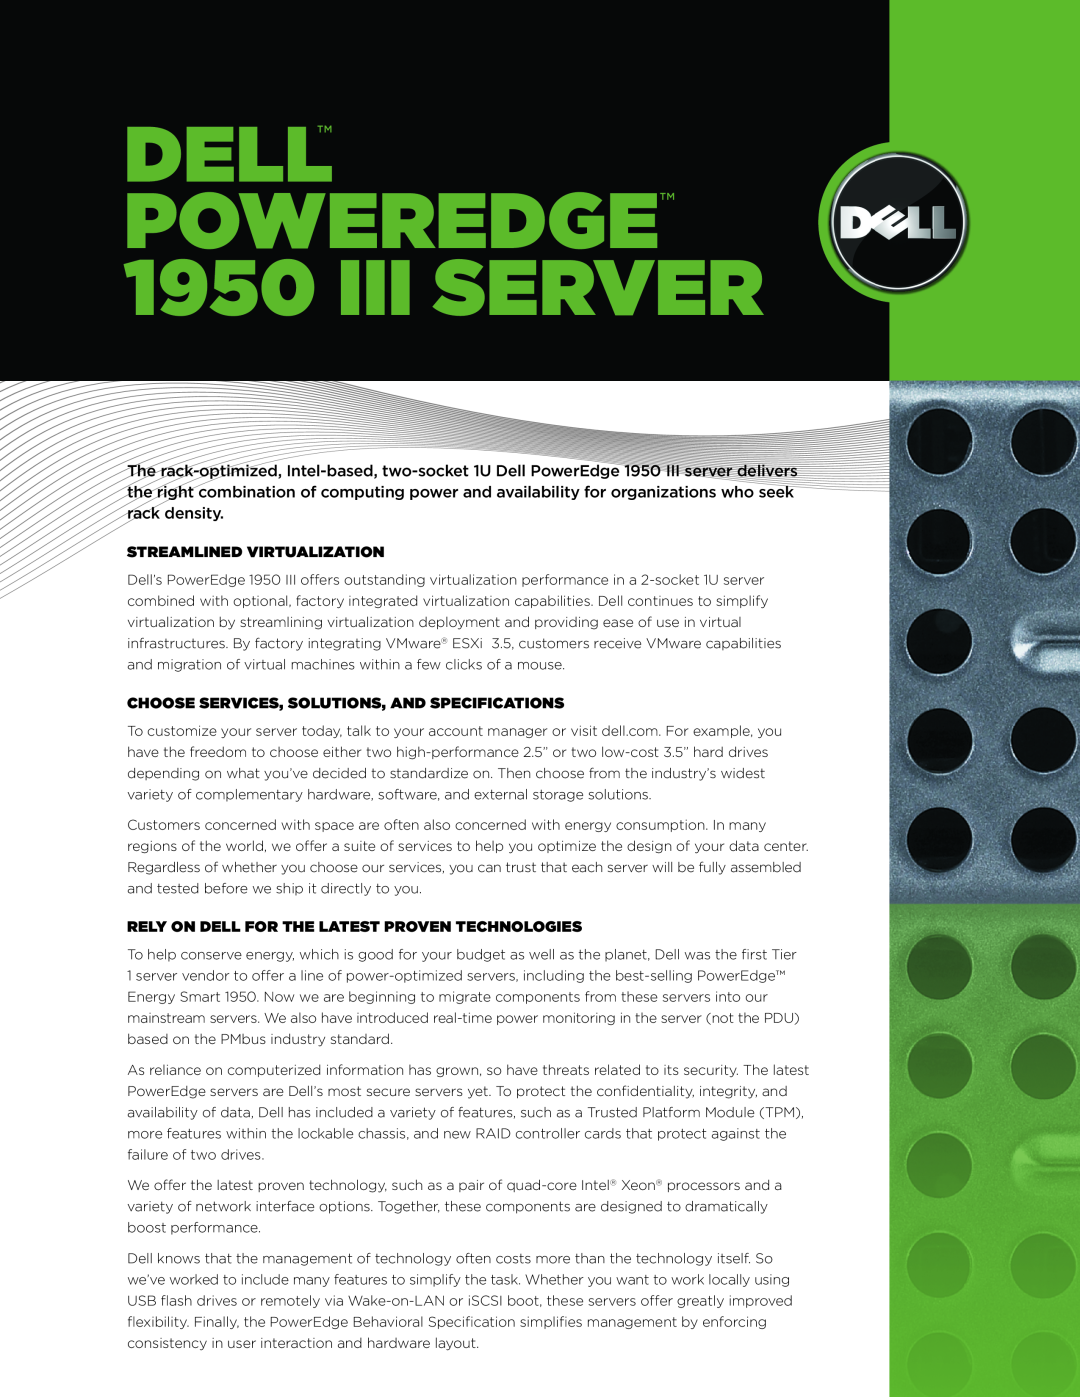 Dell 1950 III specifications Streamlined Virtualization, Choose Services, Solutions, And Specifications 